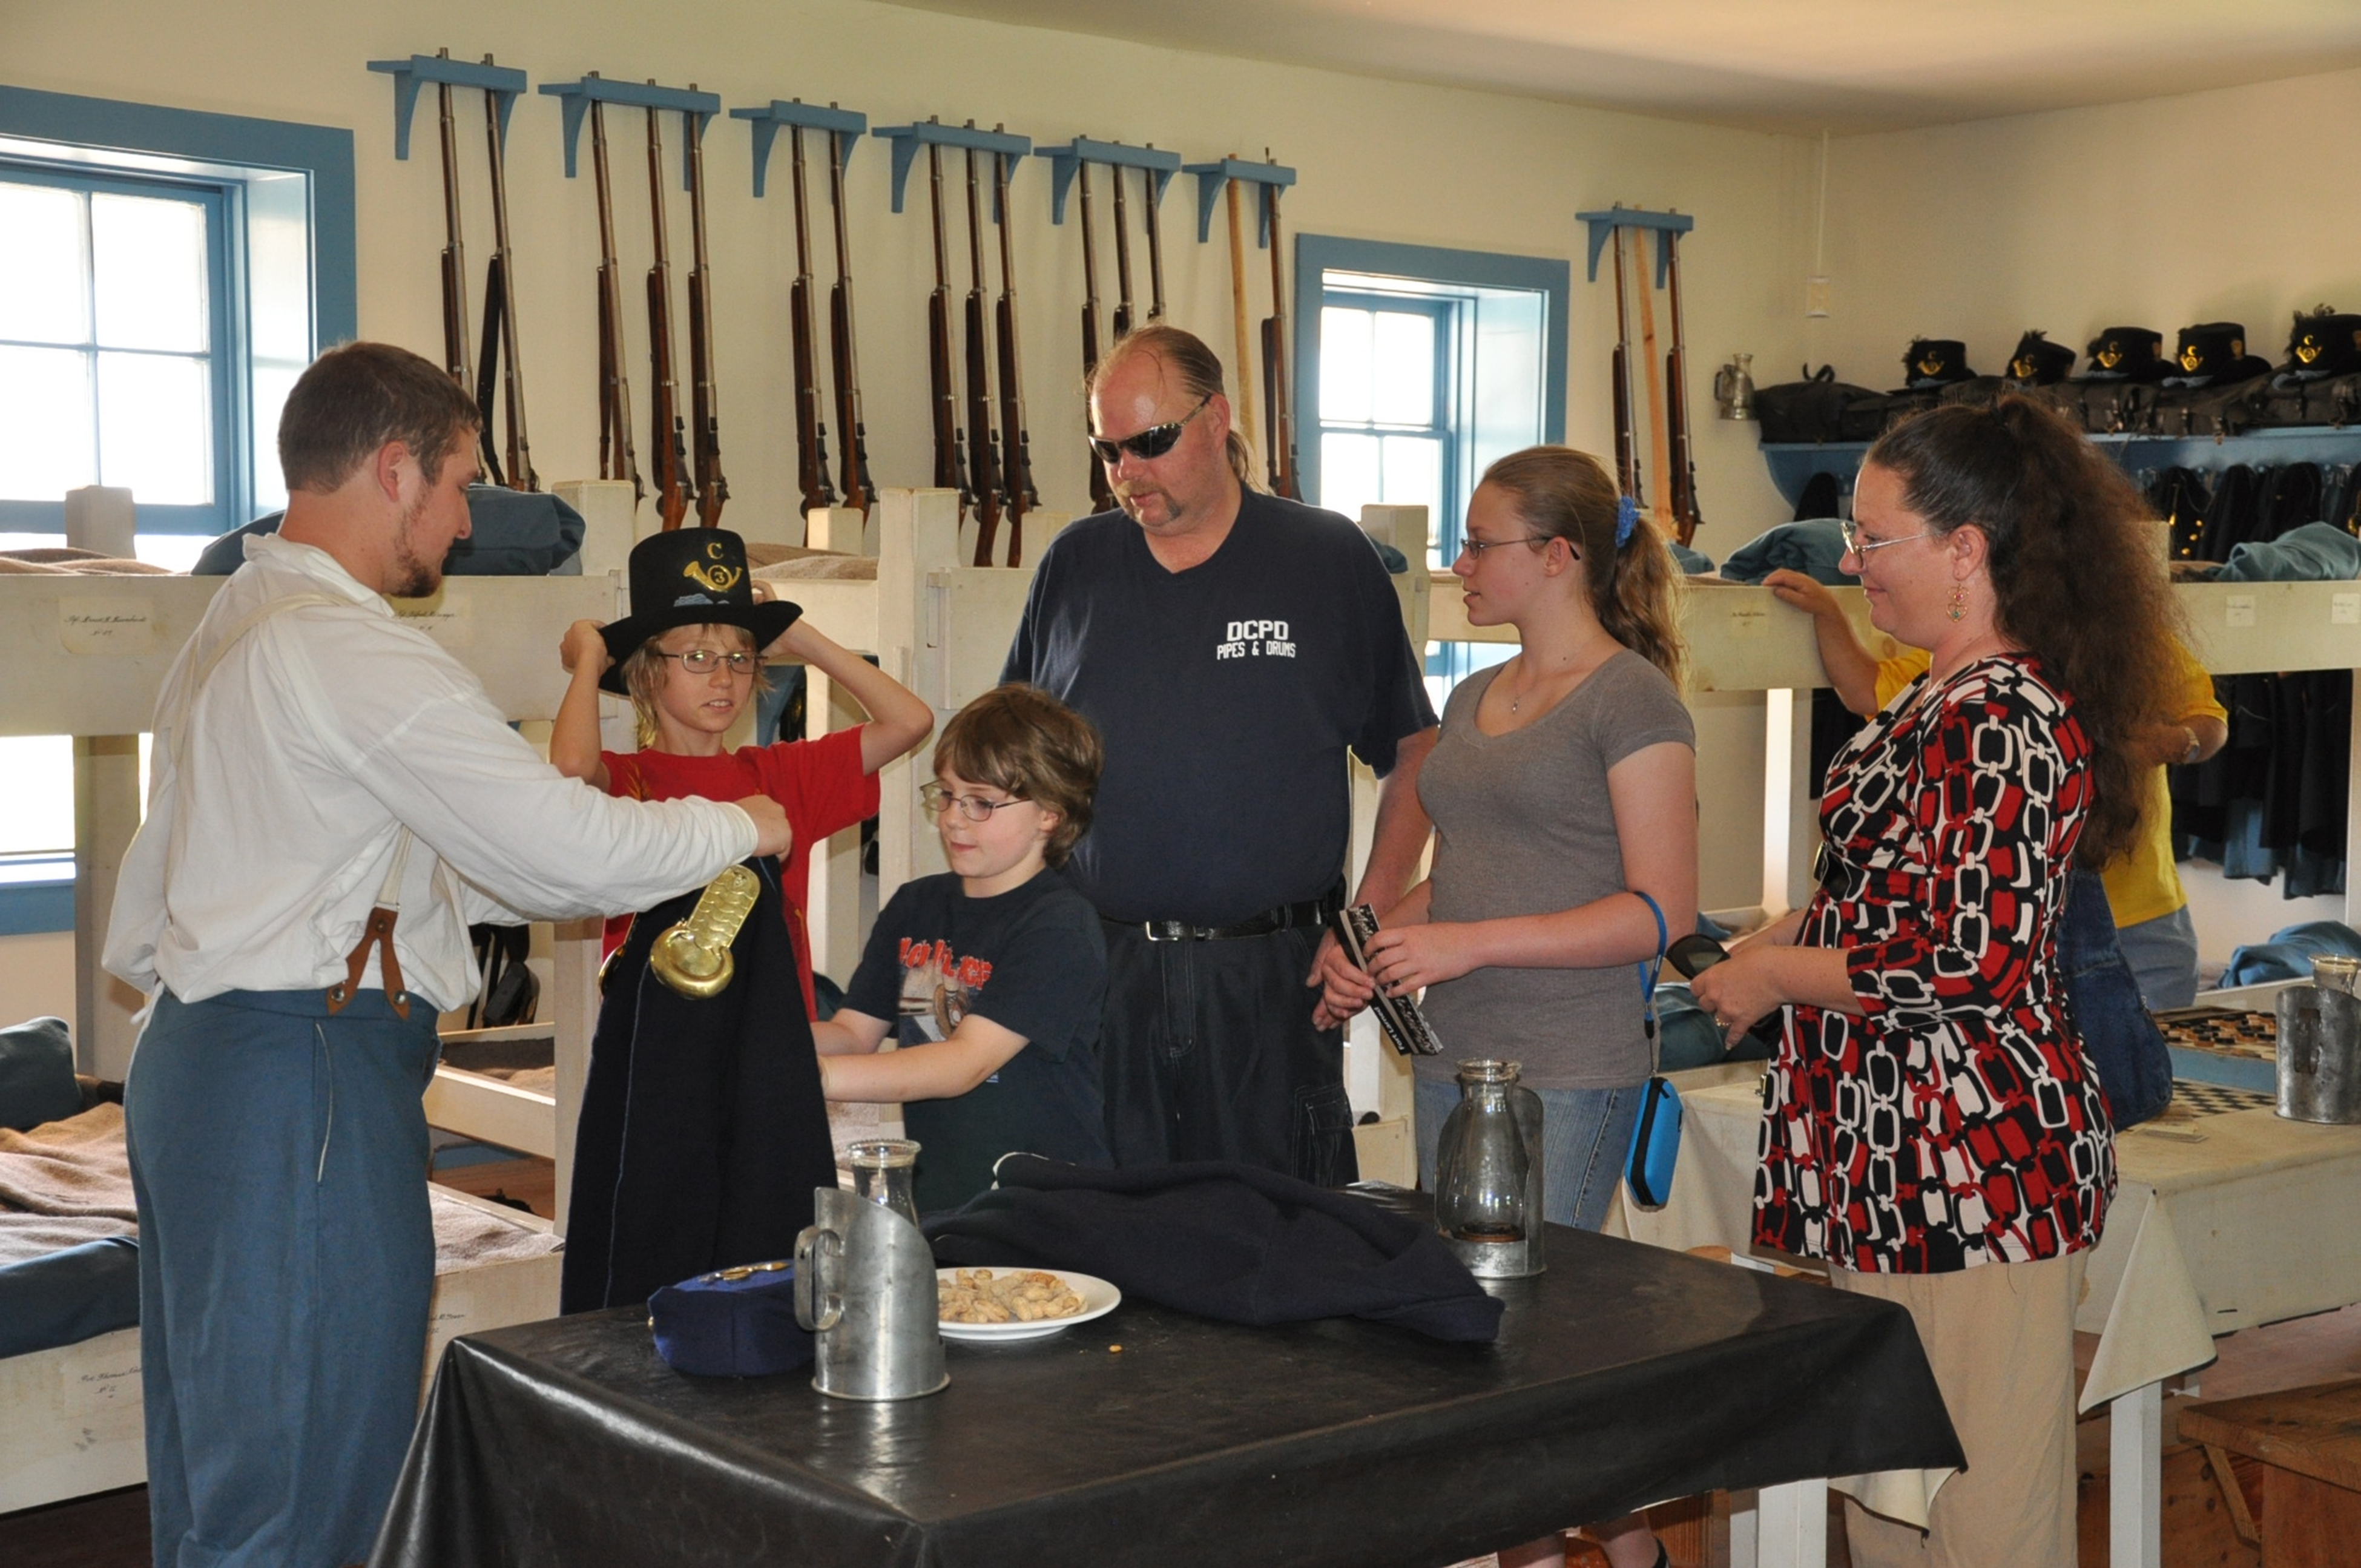 Man in 19th century U.S. Army uniform interacts with visitors in period barracks.